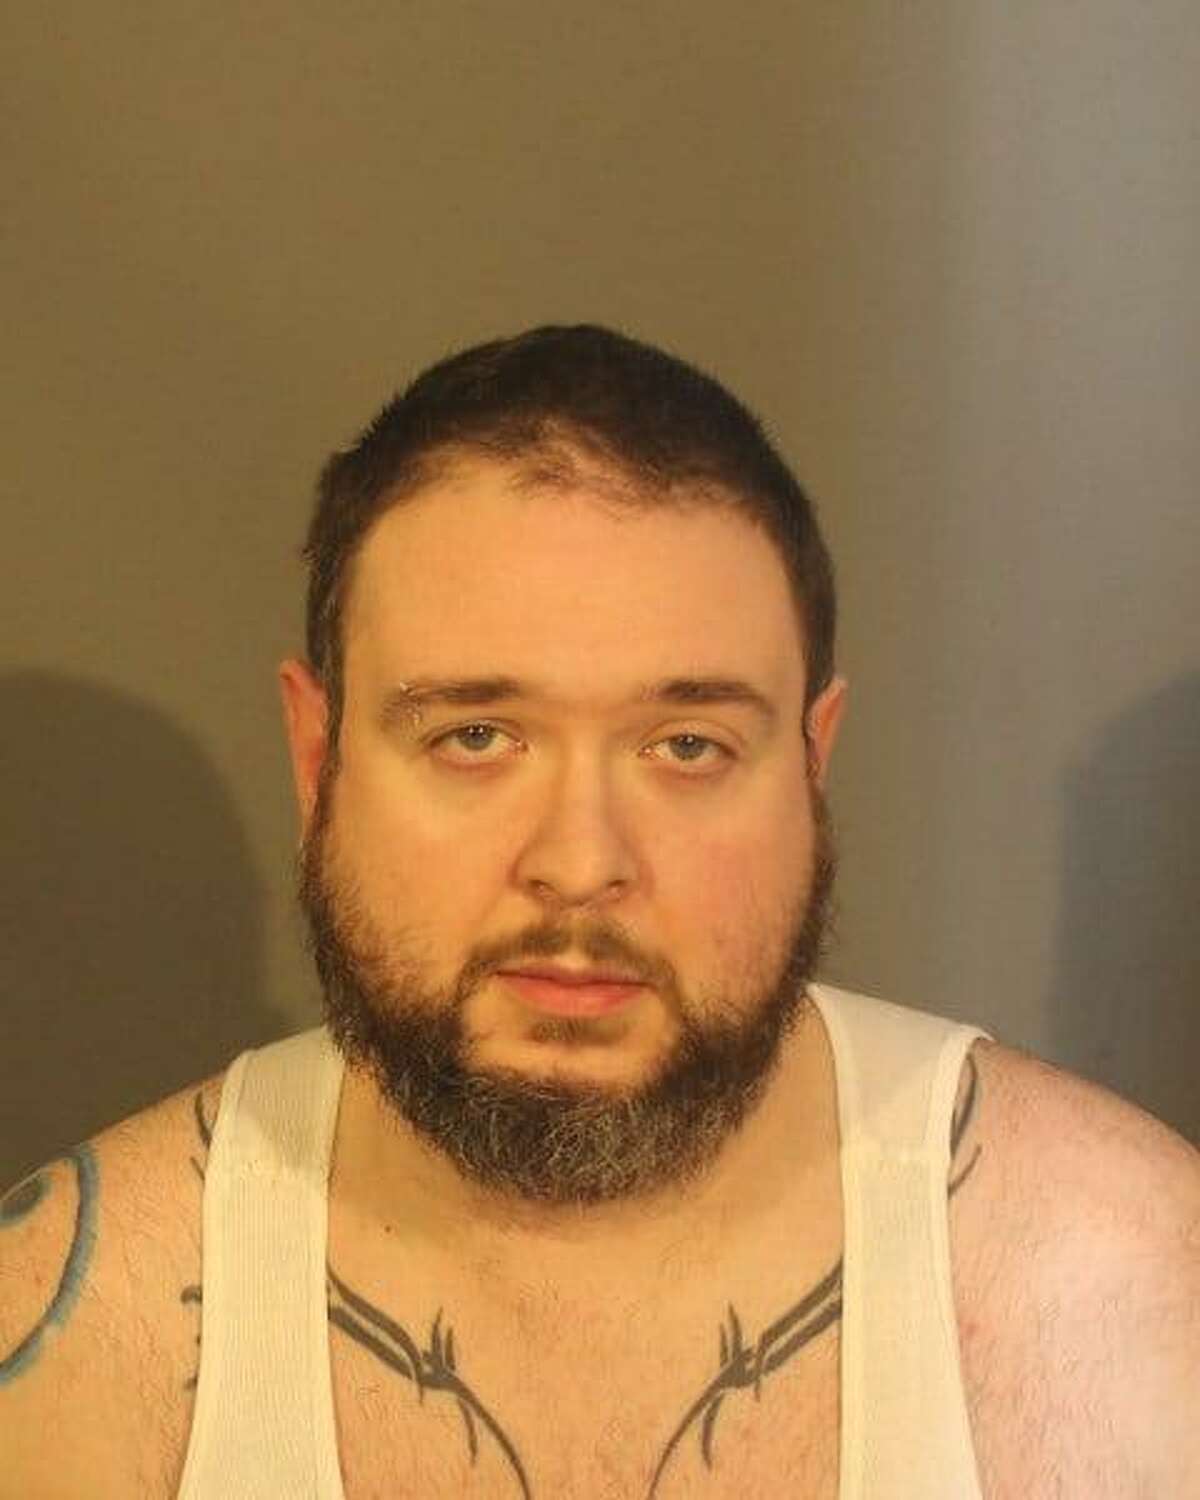 Christopher Rosini, 34, of Brookfield, was arrested March 10, 2021, on suspicion of selling drugs in Danbury and Brookfield, police said